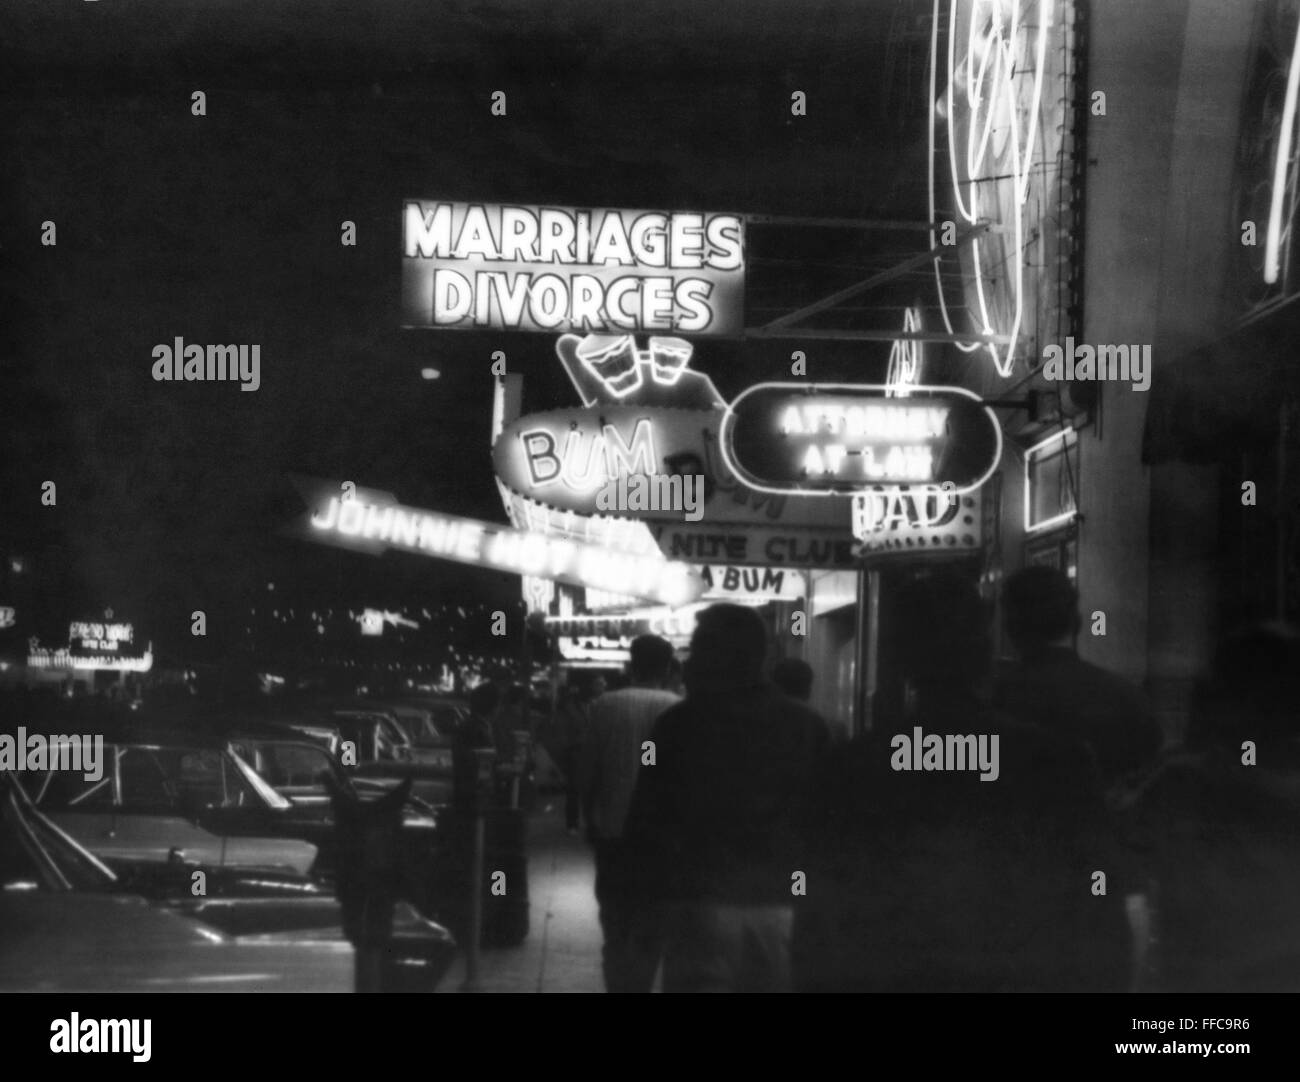 TIJUANA DIVORCE, 1950s. /nA street in Tijuana, Mexico, with neon signs for bars and quick marriages and divorces, mid-1950s. Stock Photo